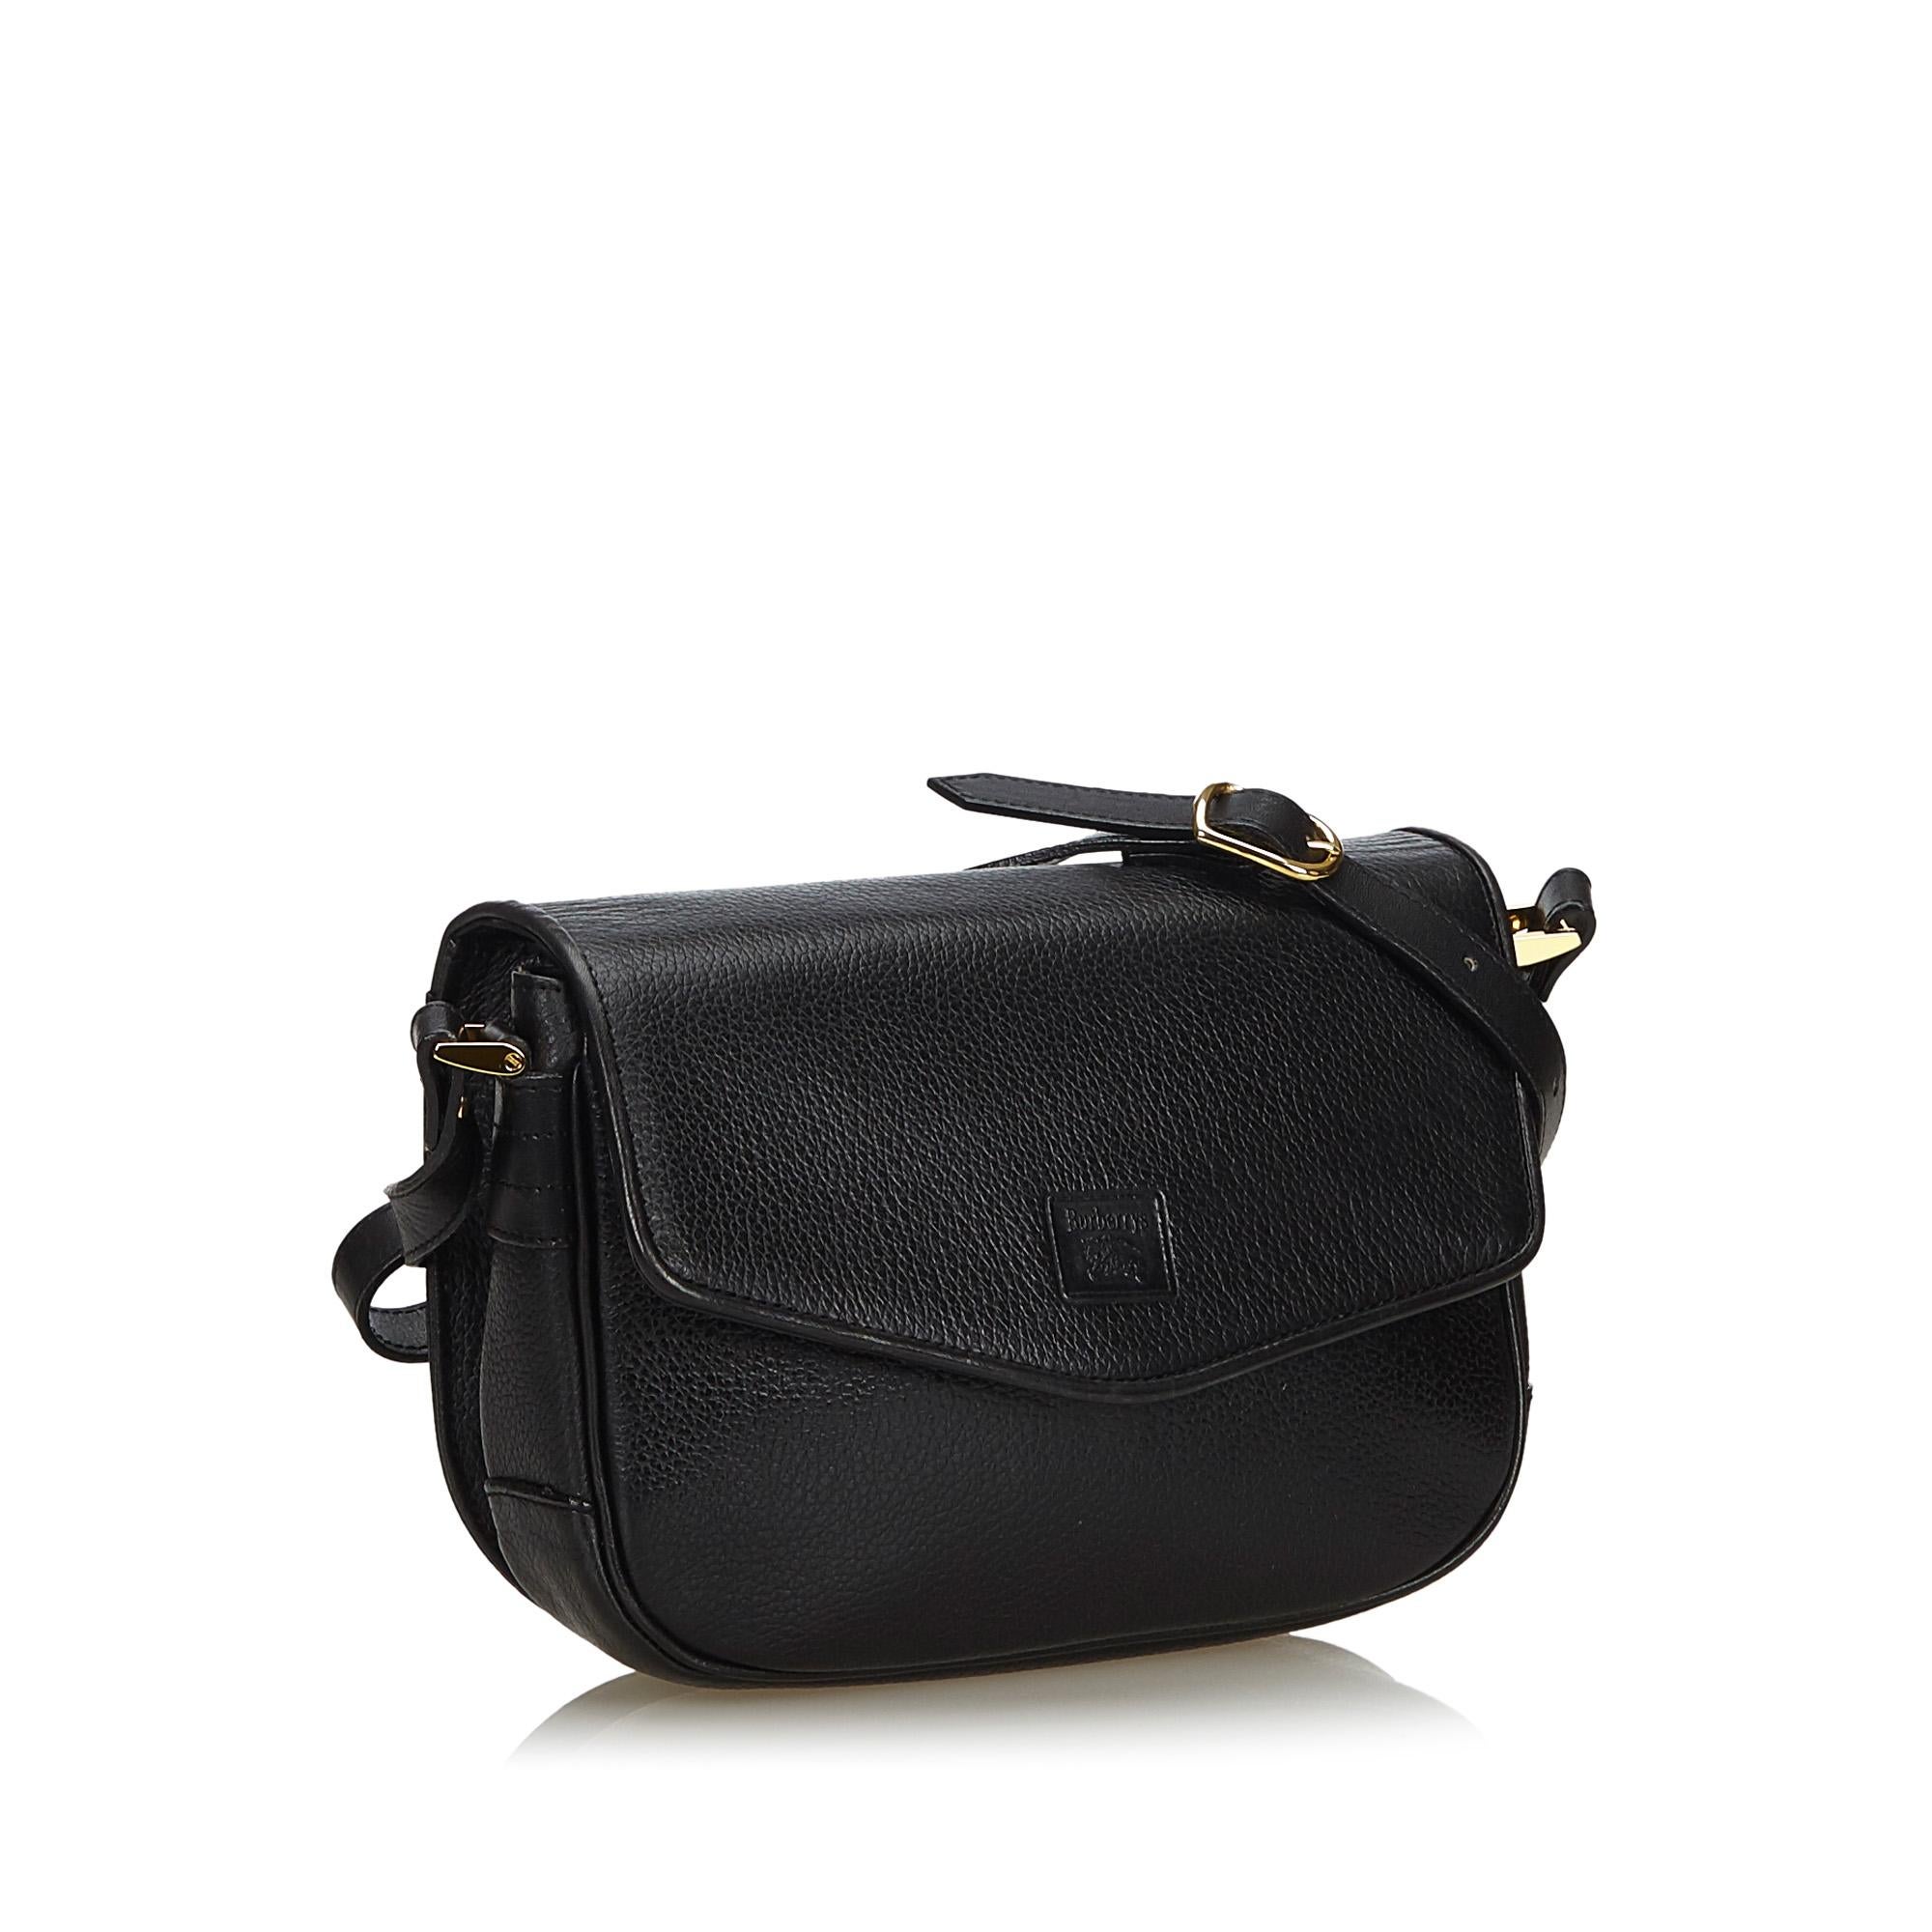 This crossbody bag features a leather body, a flat leather strap, a front flap with a magnetic closure, and interior slip compartments. It carries as B+ condition rating.

Inclusions: 
Dust Bag
Box

Dimensions:
Length: 17.00 cm
Width: 23.00